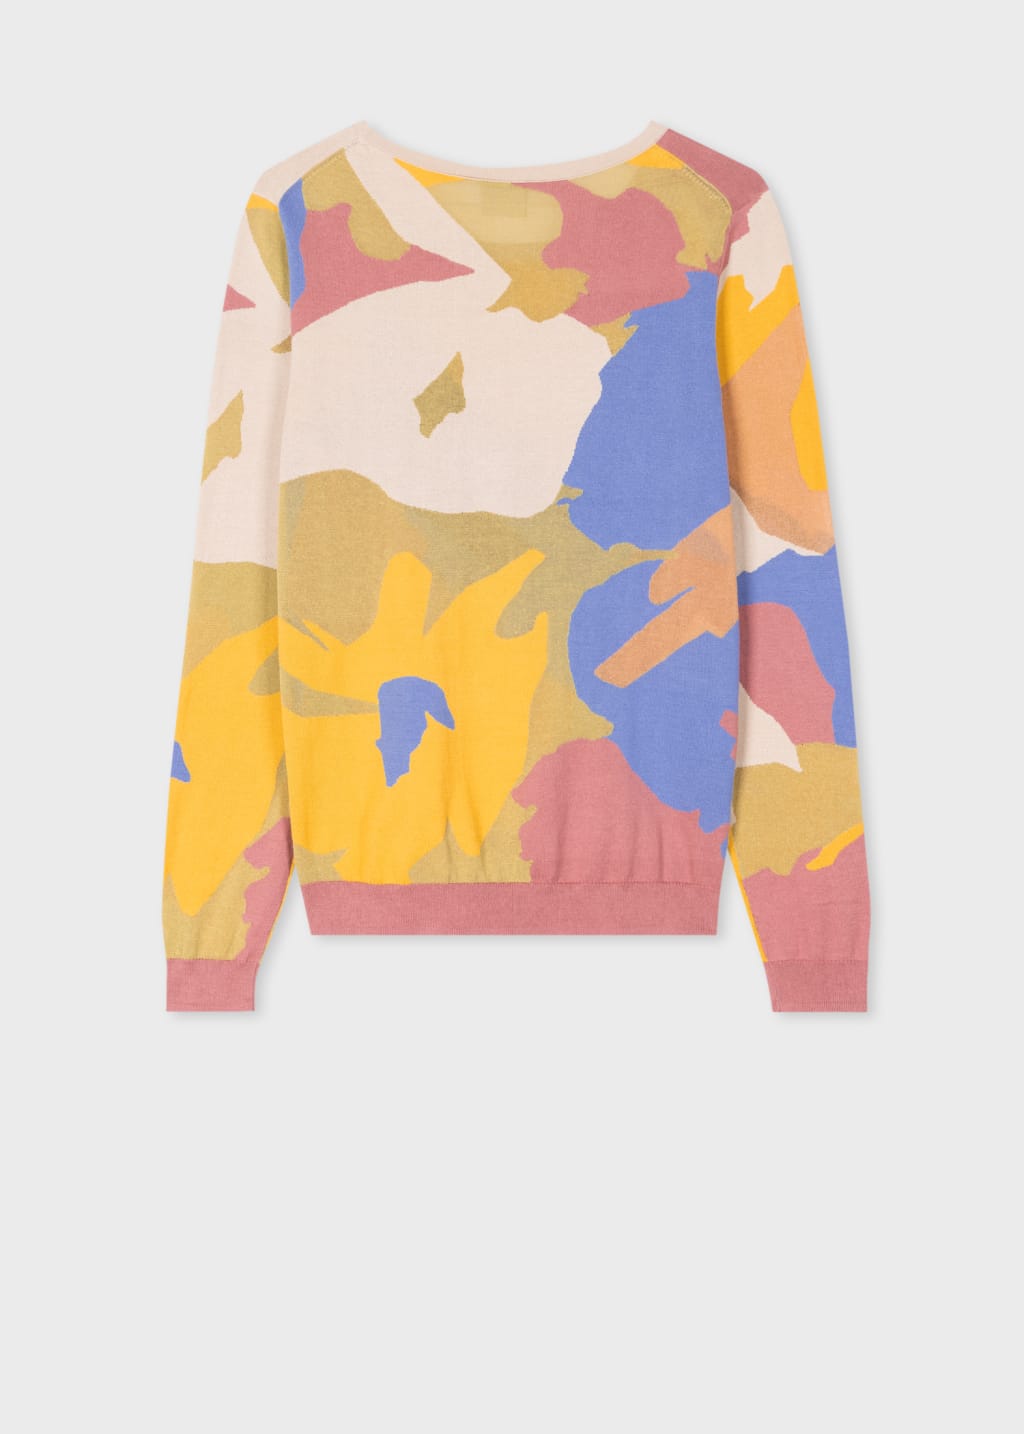 Back View - Women's 'Floral Collage' Intarsia Sweater Paul Smith